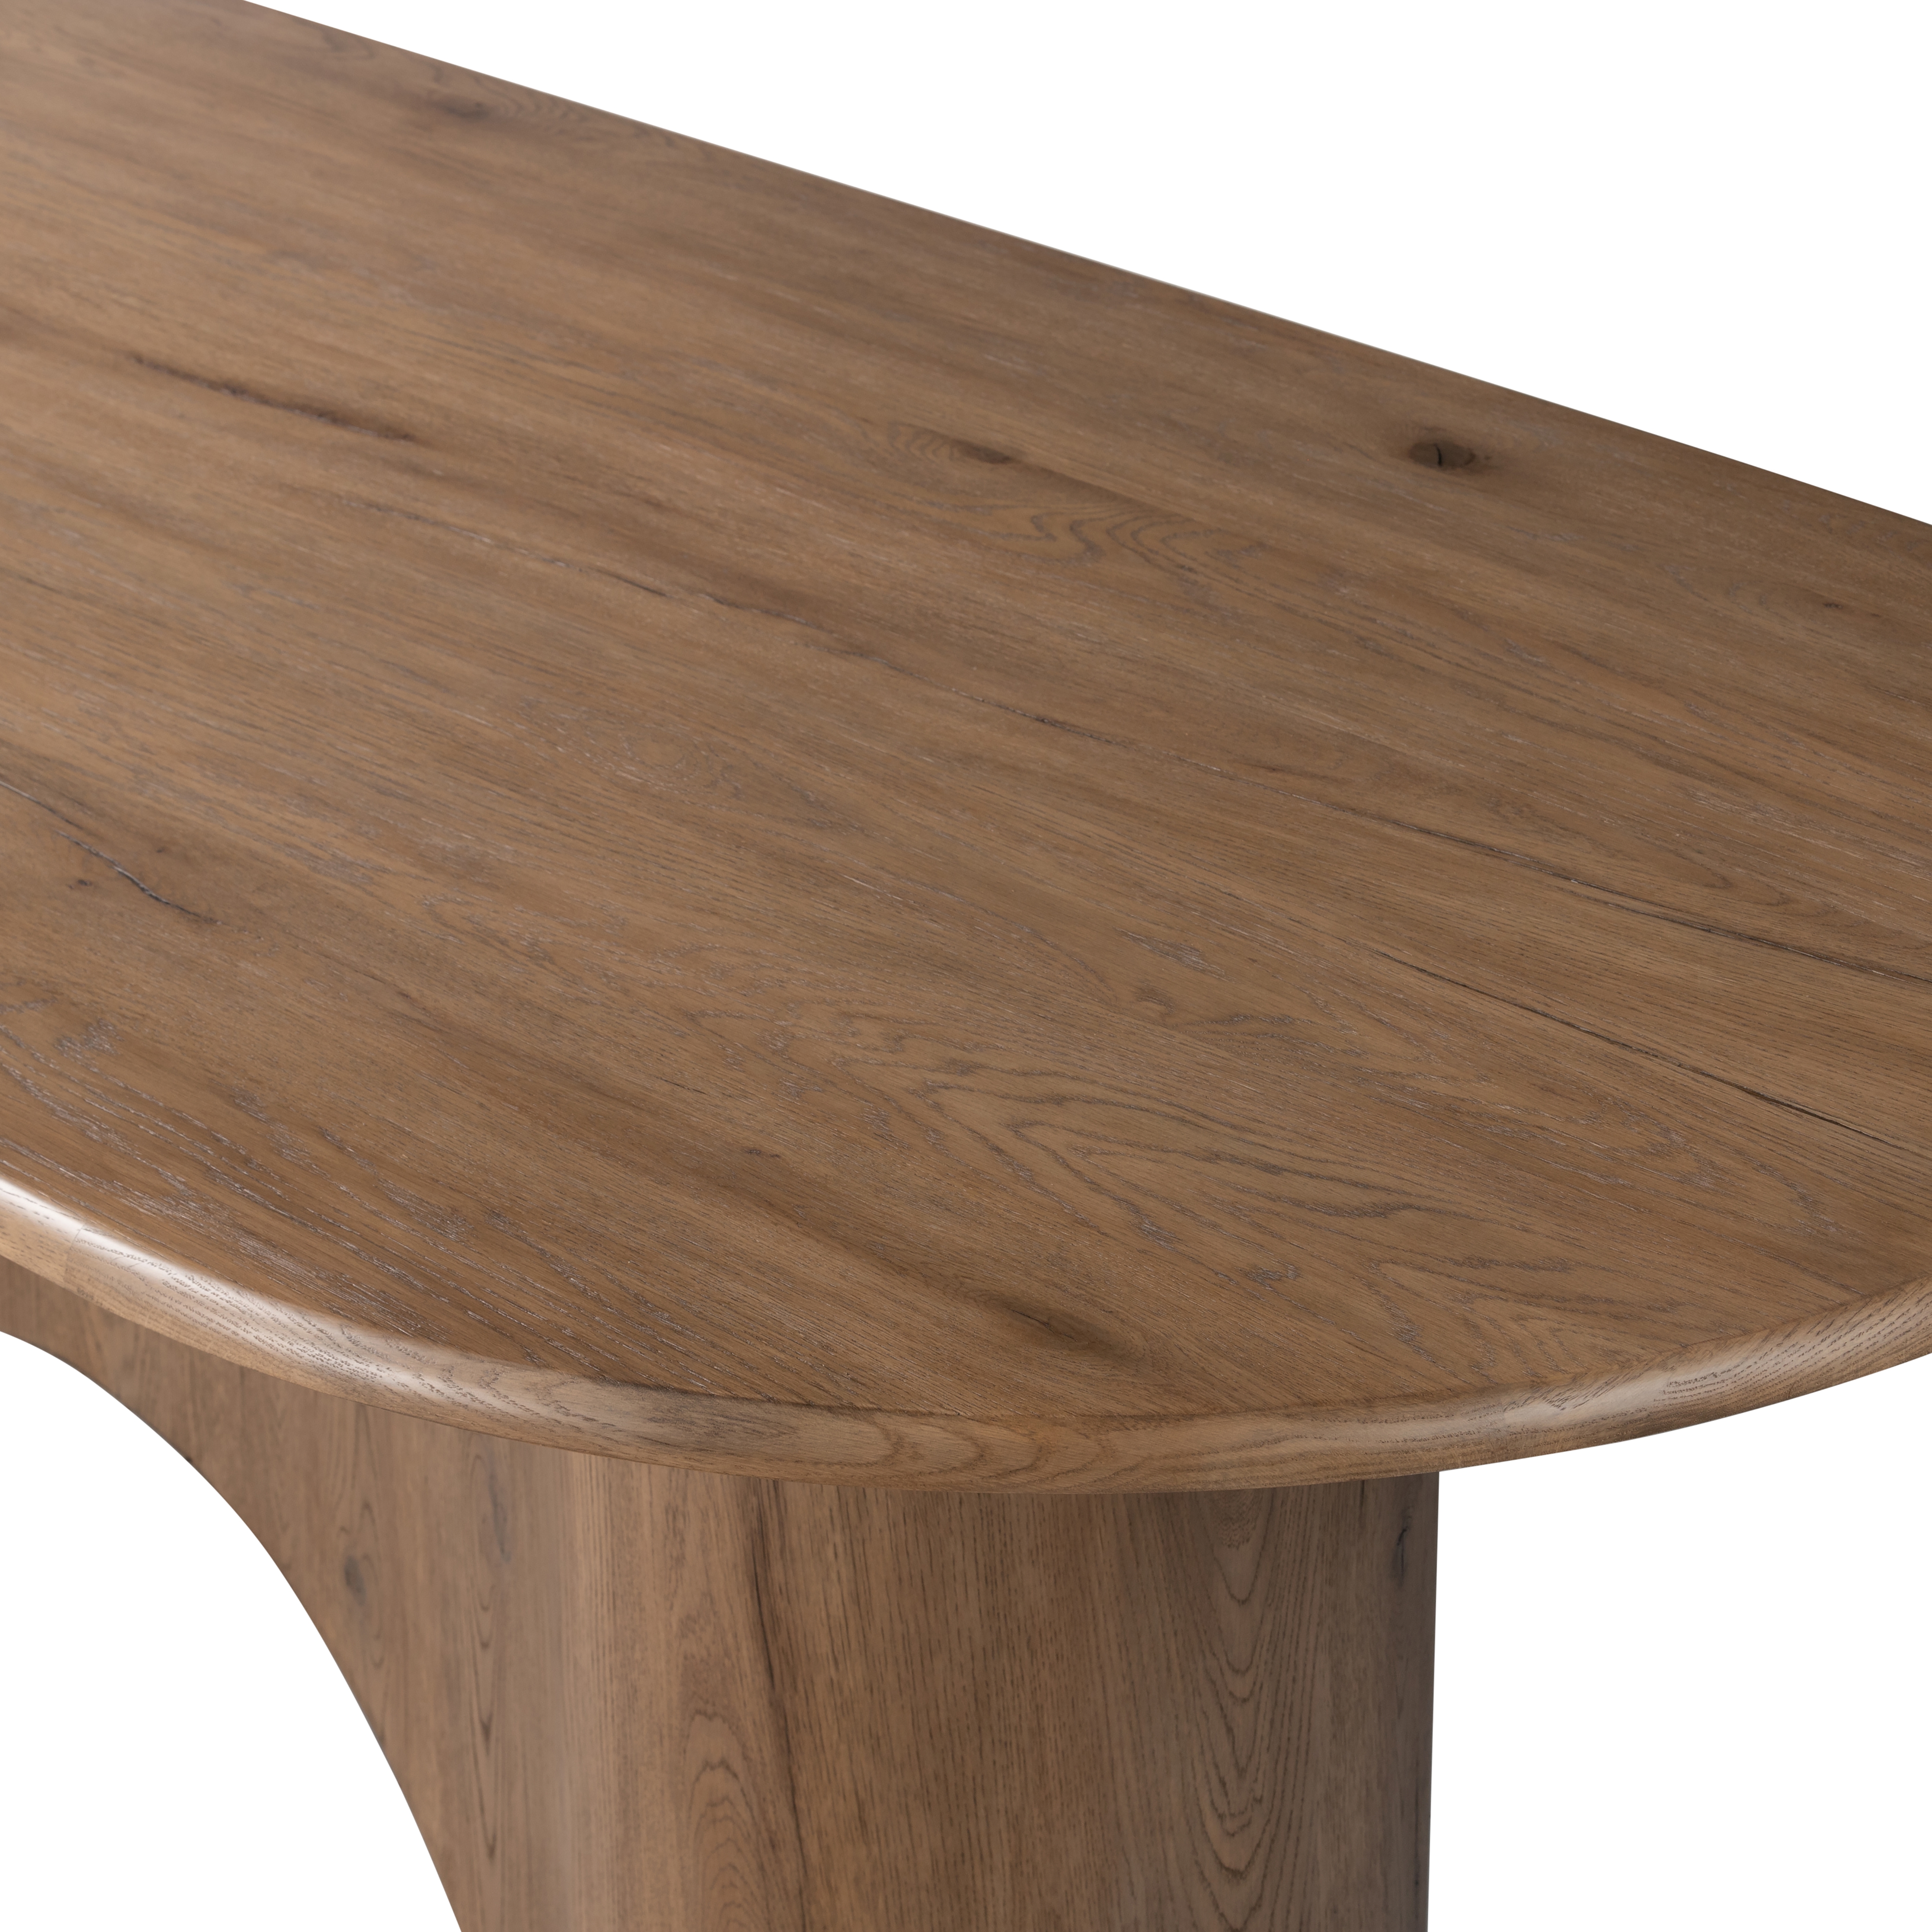 Olexey Oval Dining Table-Rubbed Light - Image 5